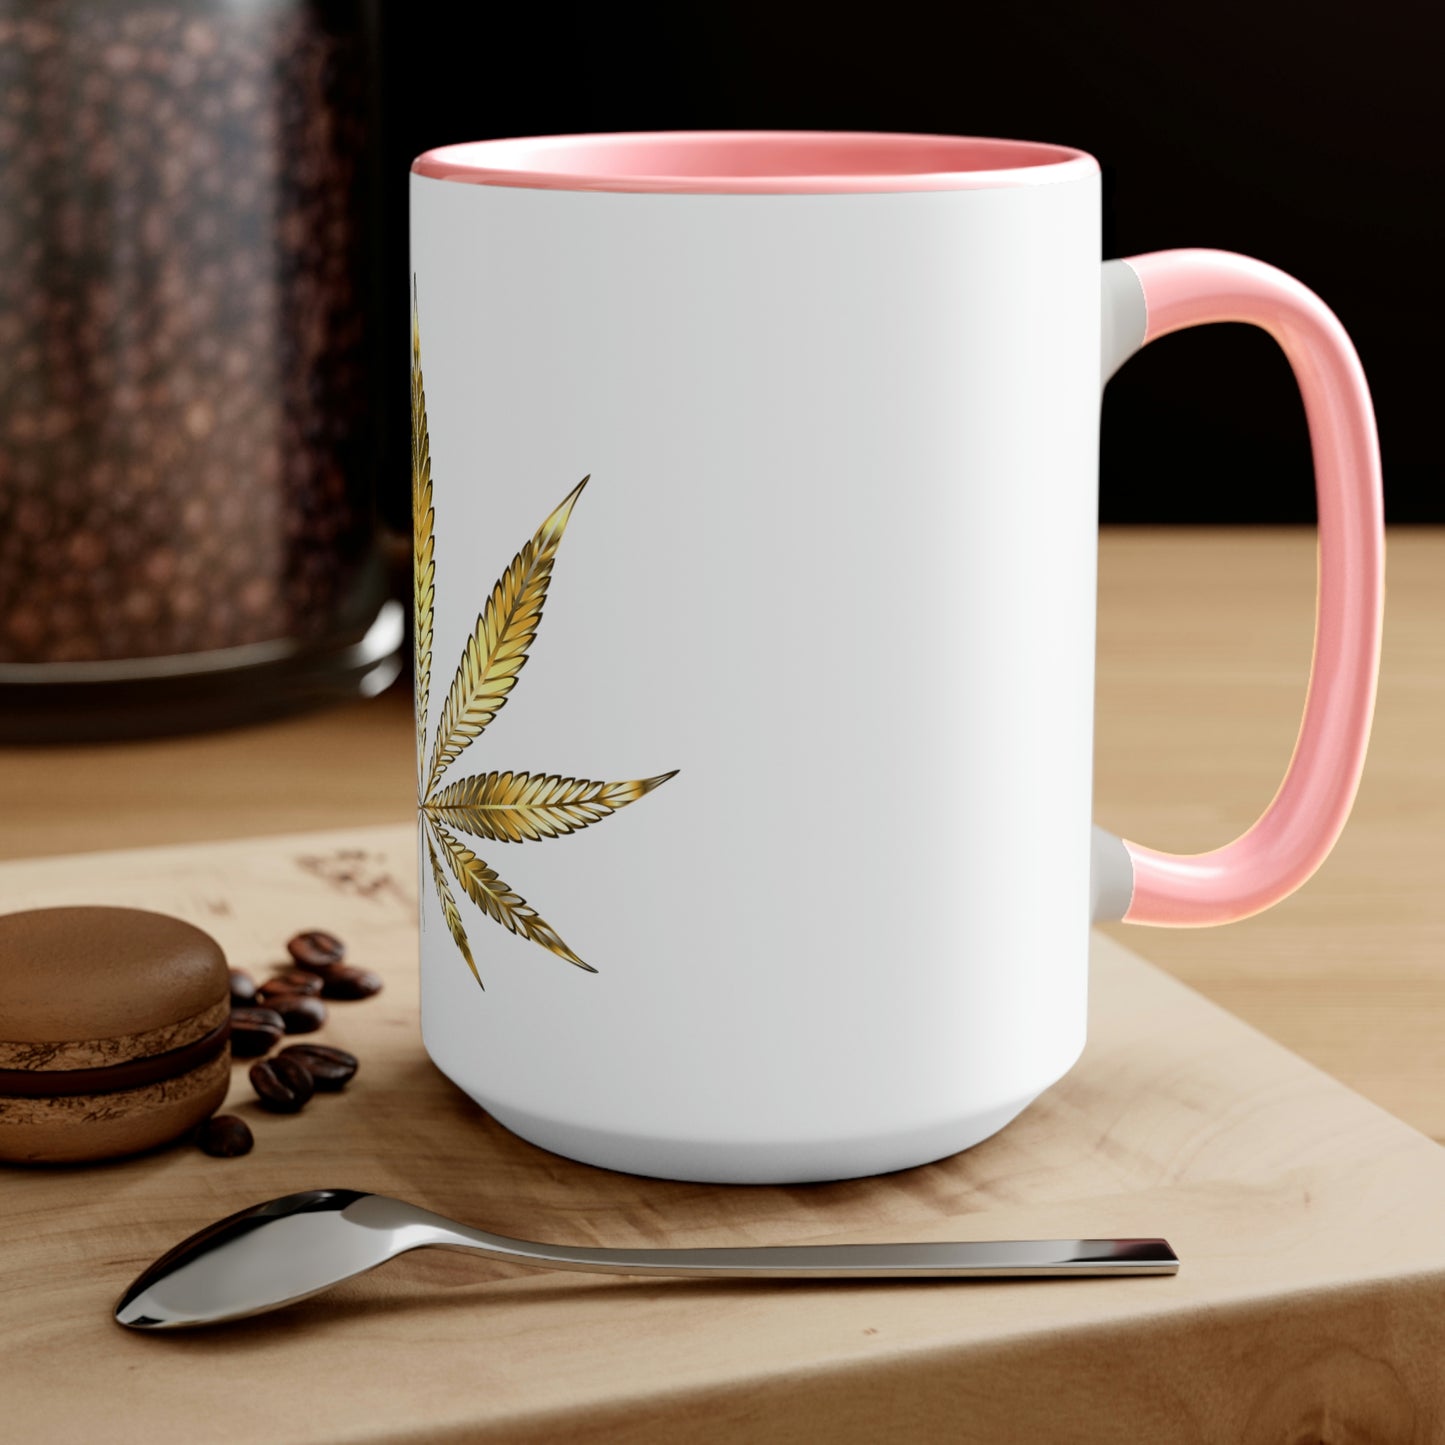 A white cannabis mug with a pink interior featuring a bright gold weed leaf on the front center, sitting on a wood base.